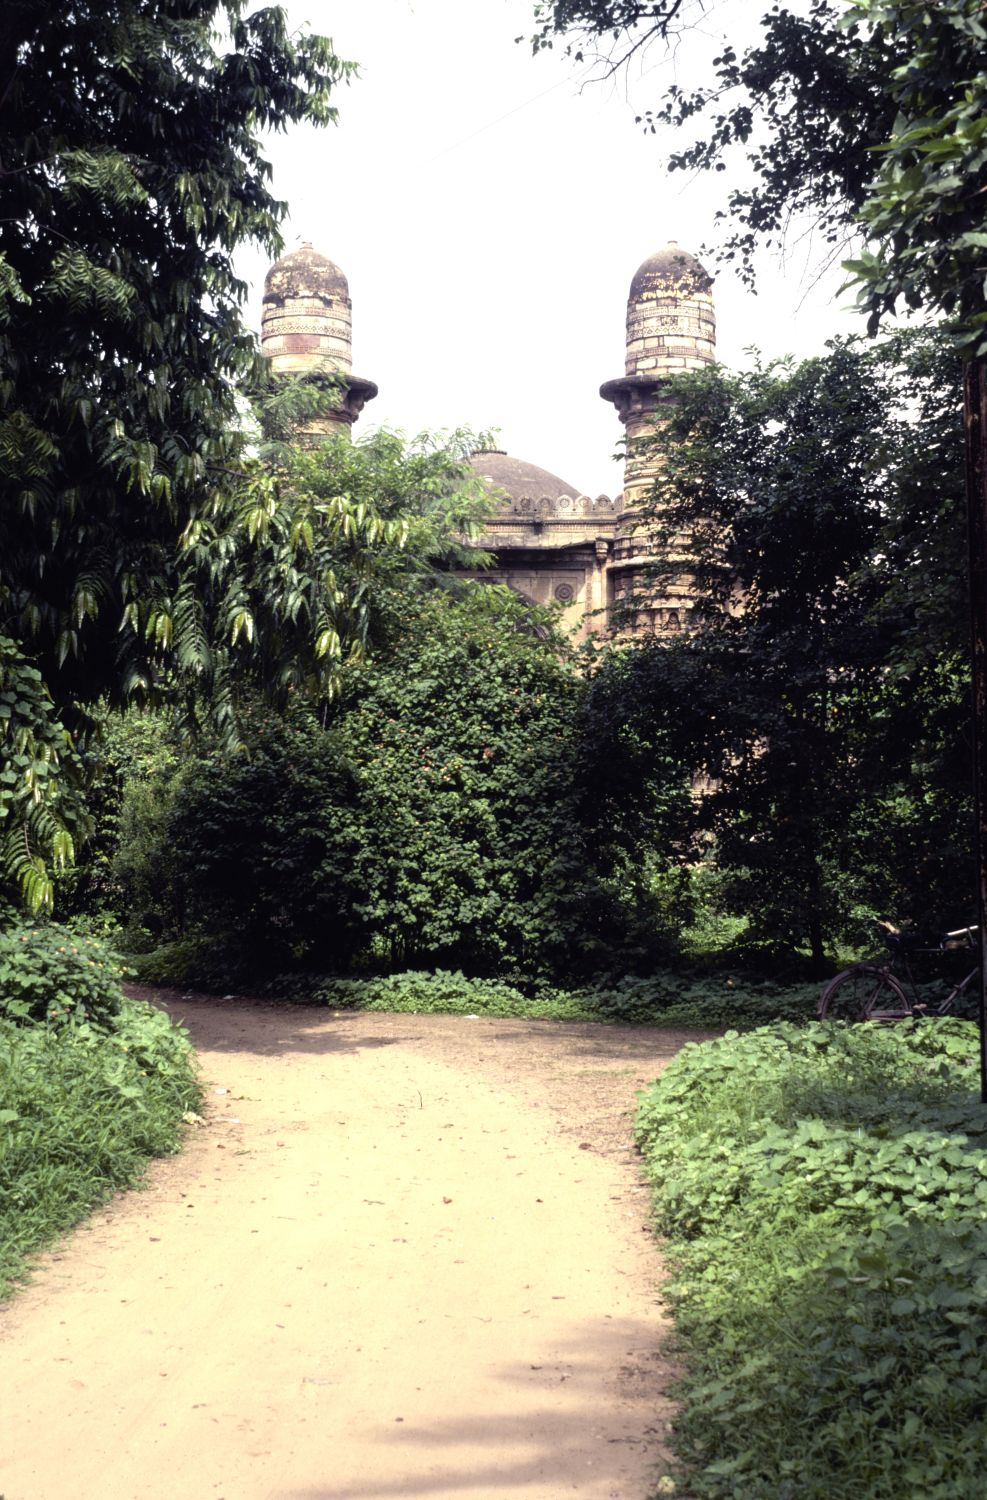 View of minarets over trees in garden from east.